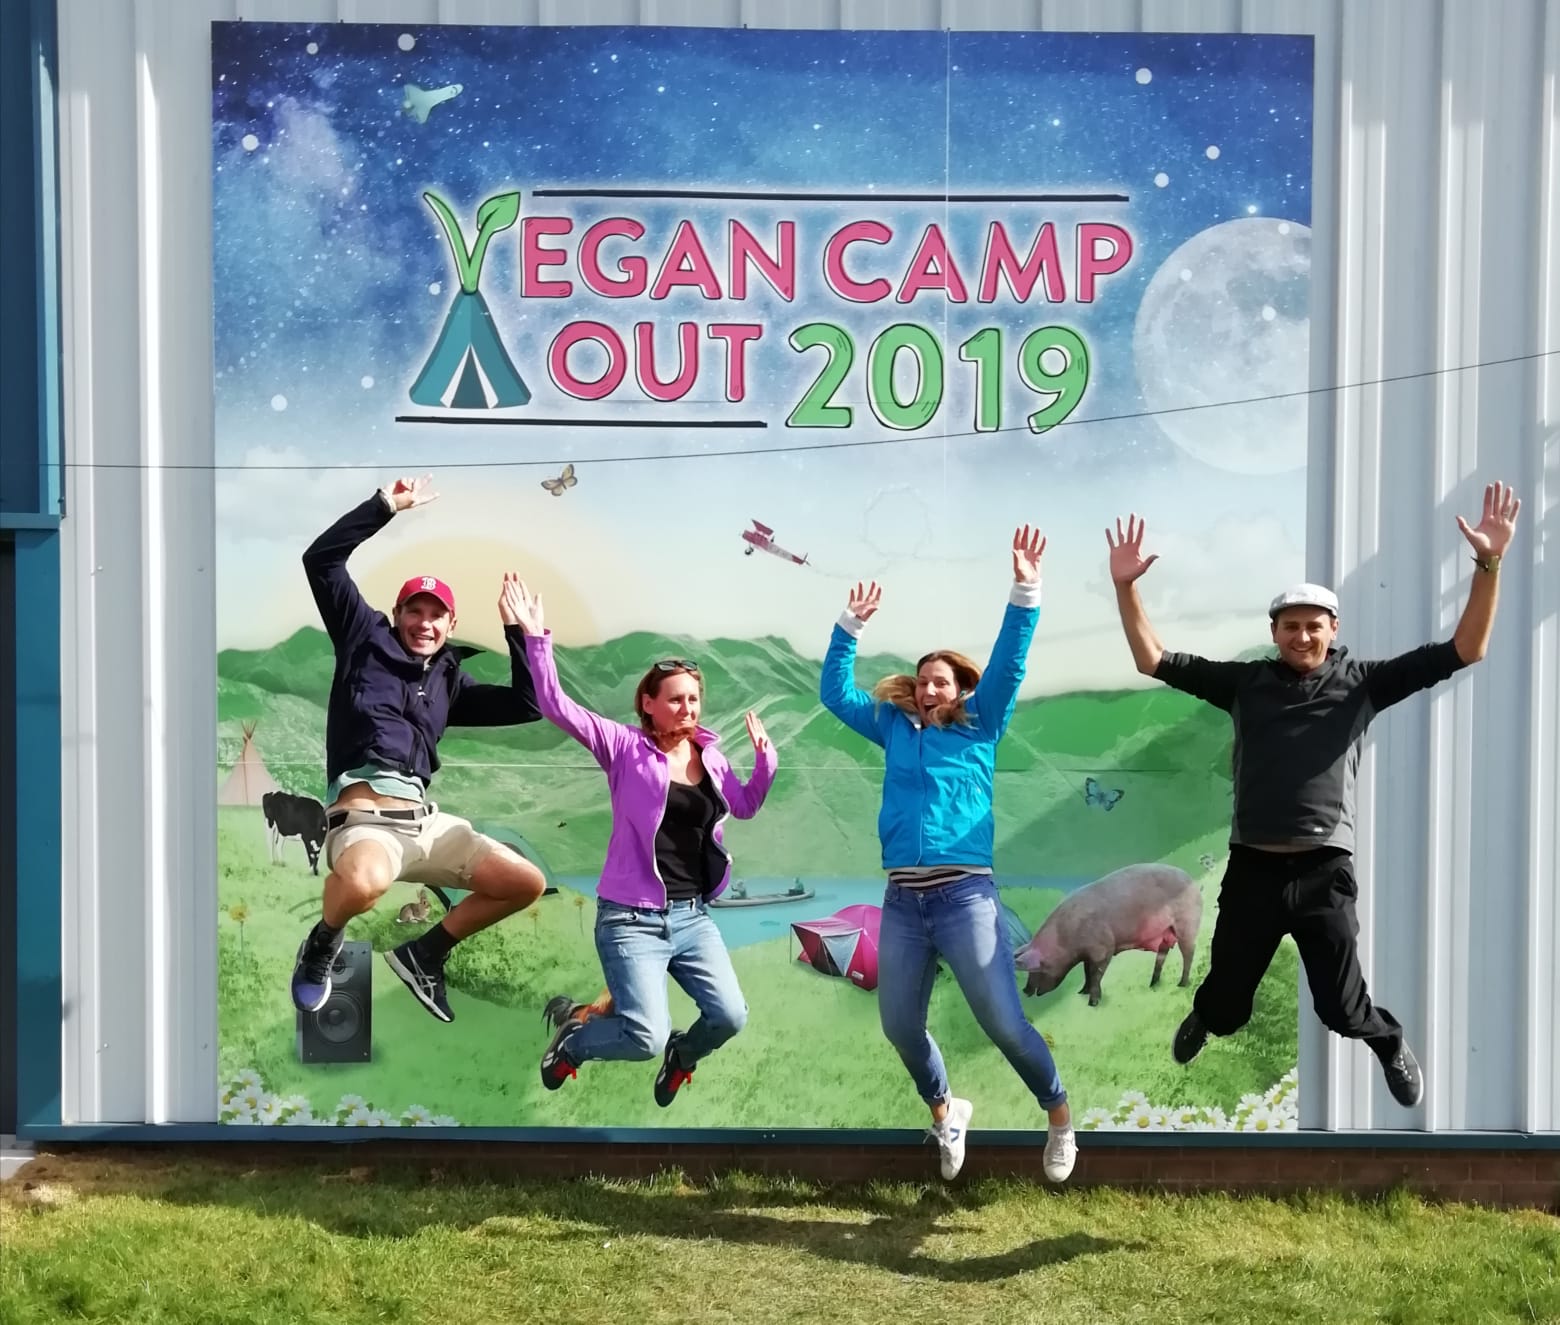 Jumping for joy at the Vegan Campout 2019